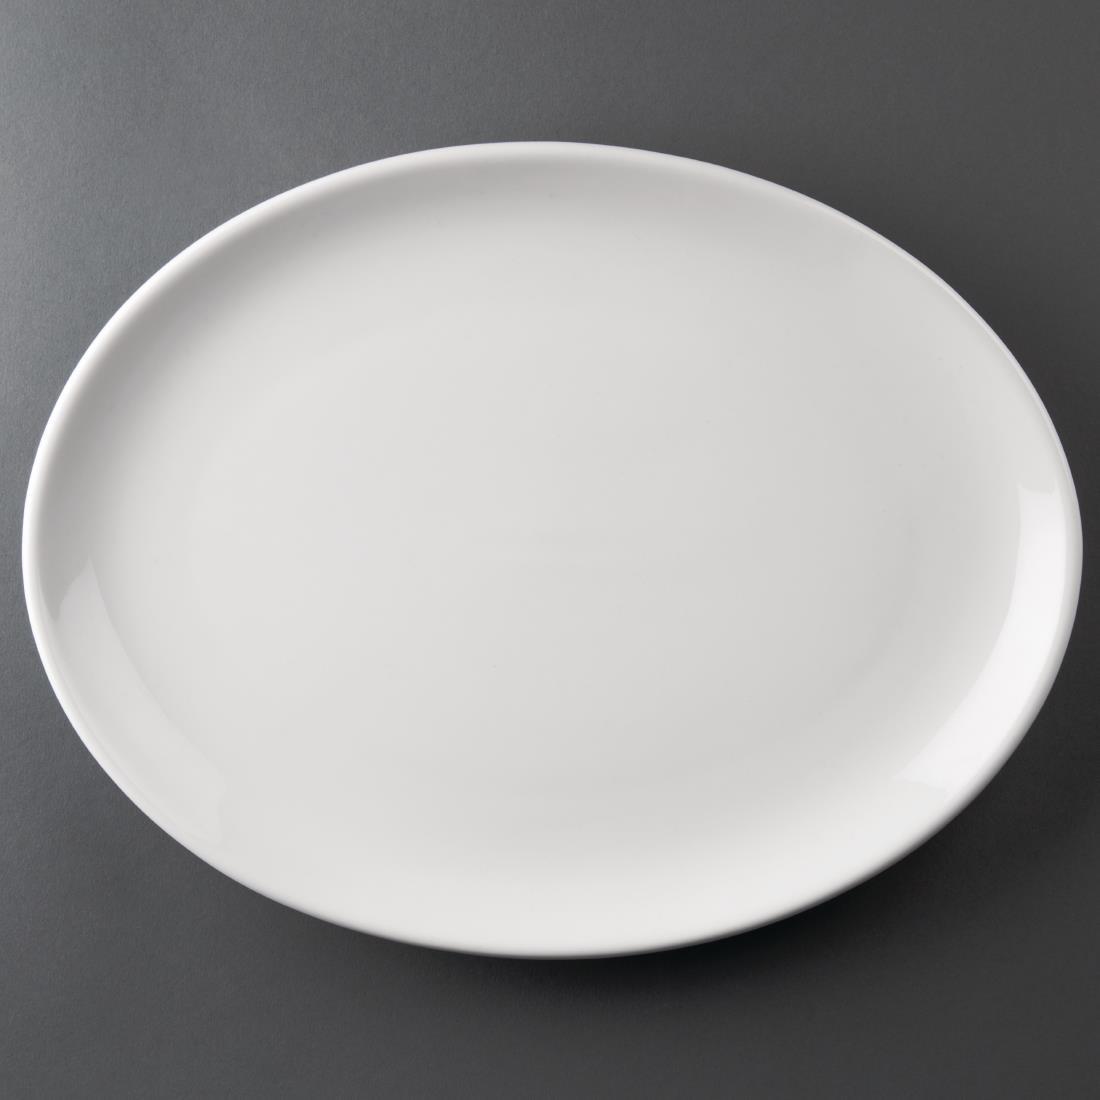 Olympia Athena Oval Coupe Plates 305 x 241 mm (Pack of 6) - CC212  - 1